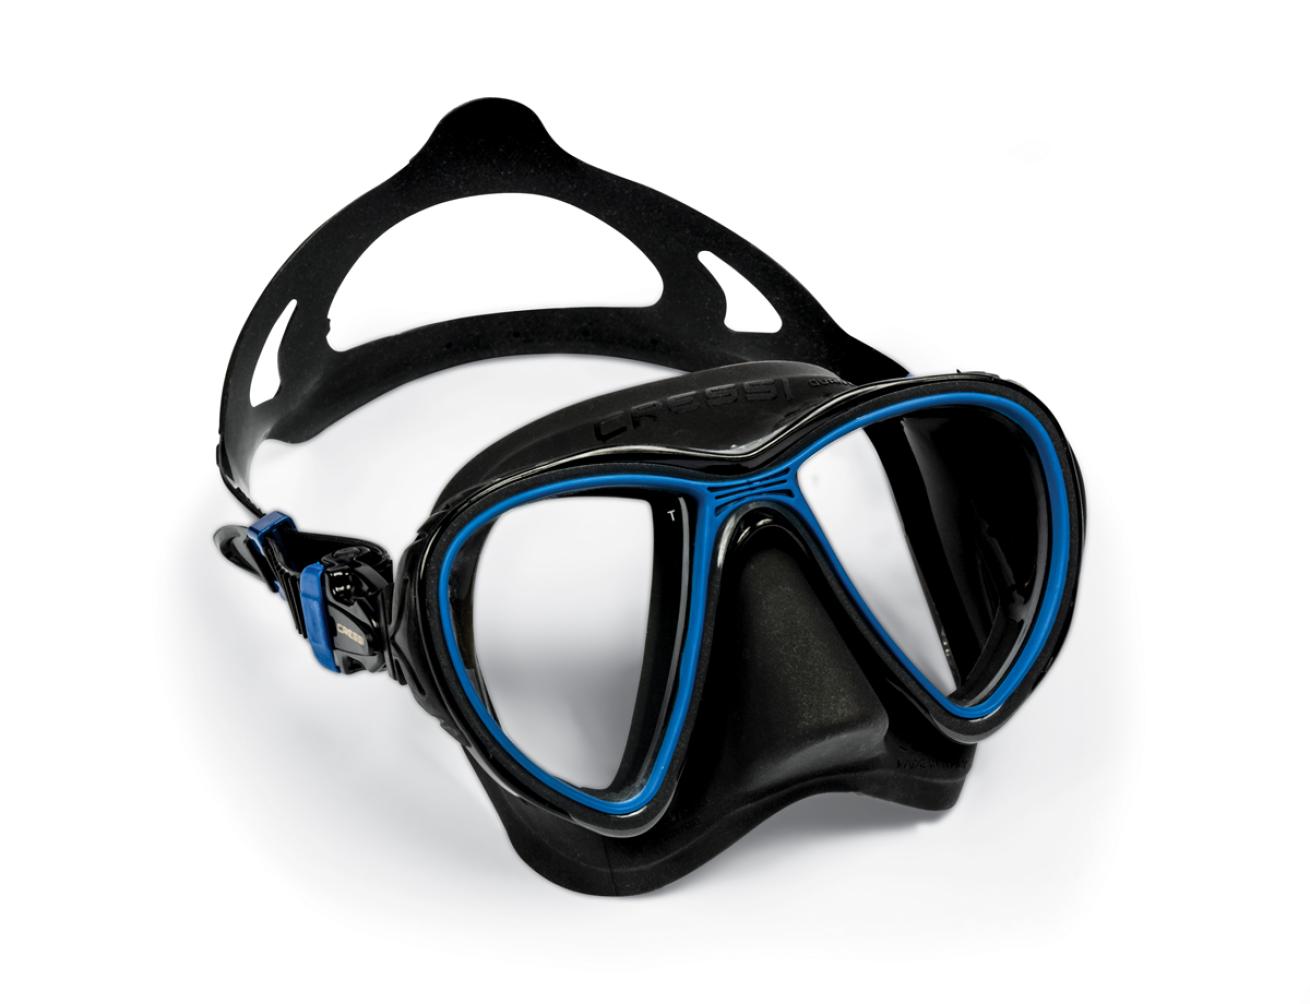 Cressi Single Lens Frameless Scuba Mask for Good Visibility - F-Dual:  Designed in Italy